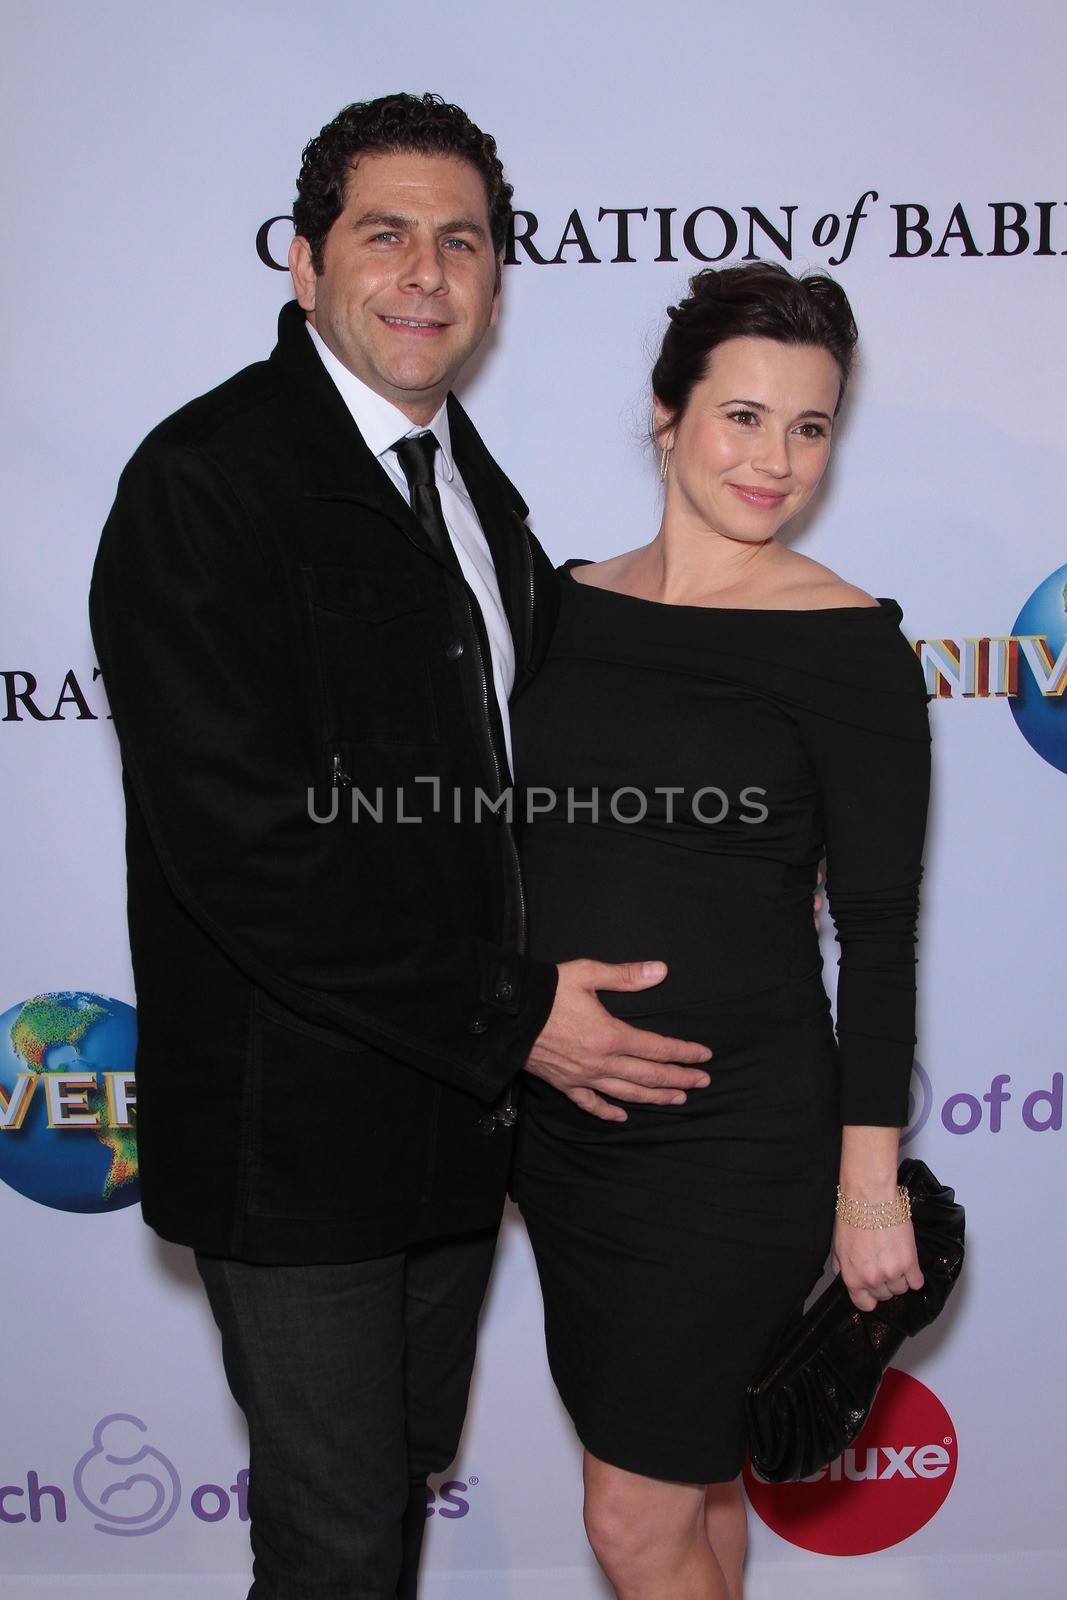 Steven Rodriguez and Linda Cardellini at the March Of Dimes' 6th Annual Celebration Of Babies Luncheon, Beverly Hills Hotel, Beverly Hills, CA 12-02-11/ImageCollect by ImageCollect